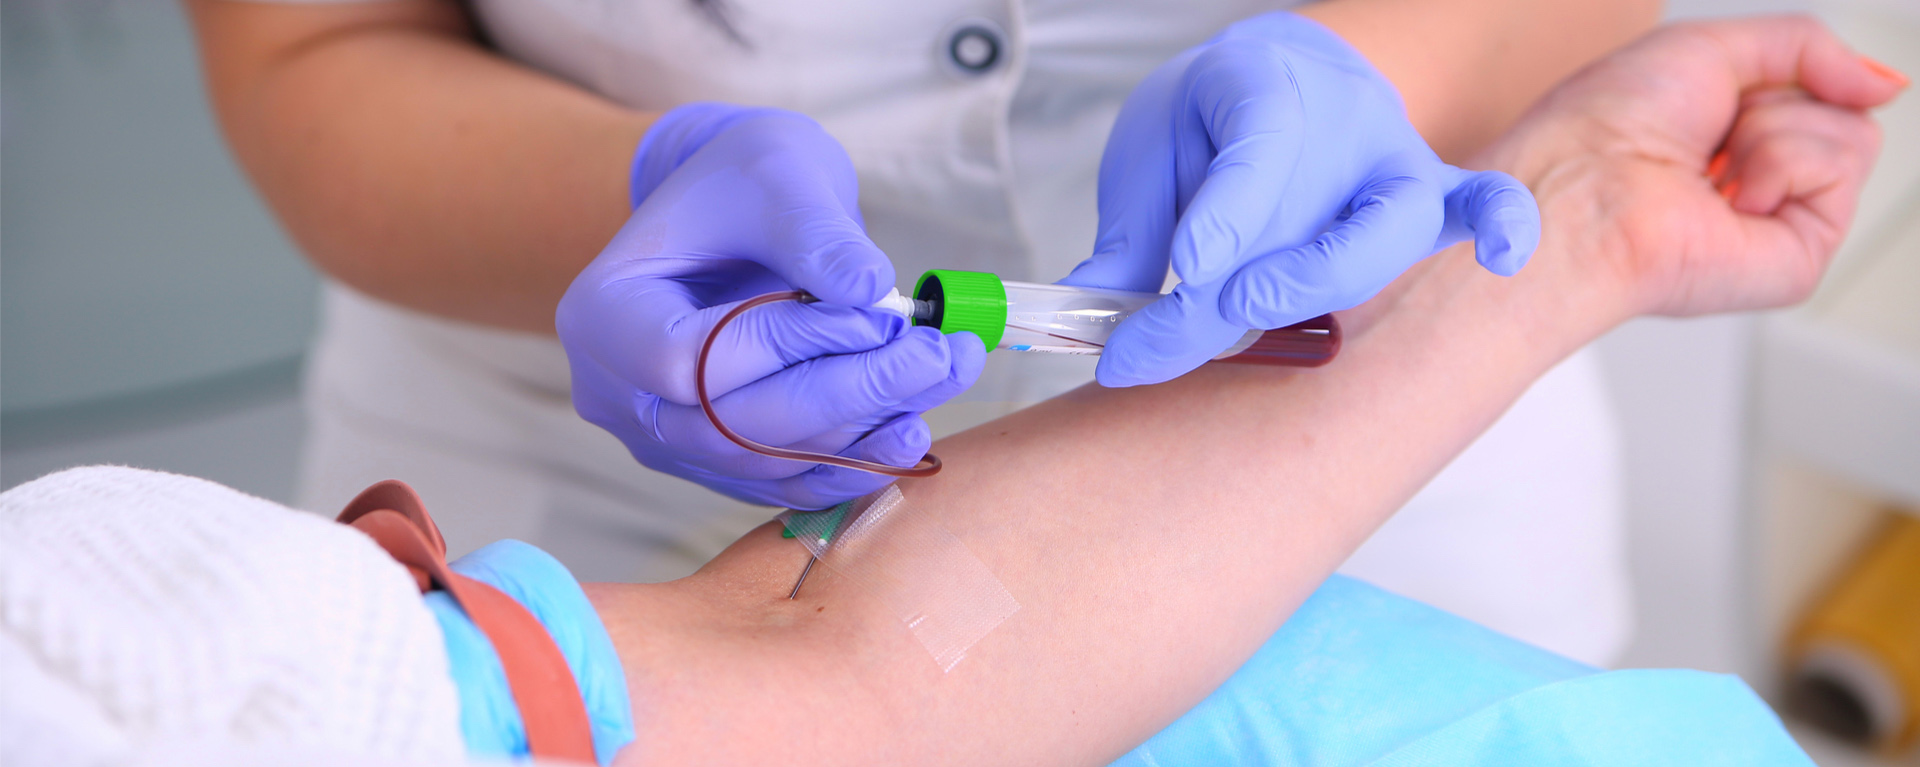 phlebotomist drawing blood